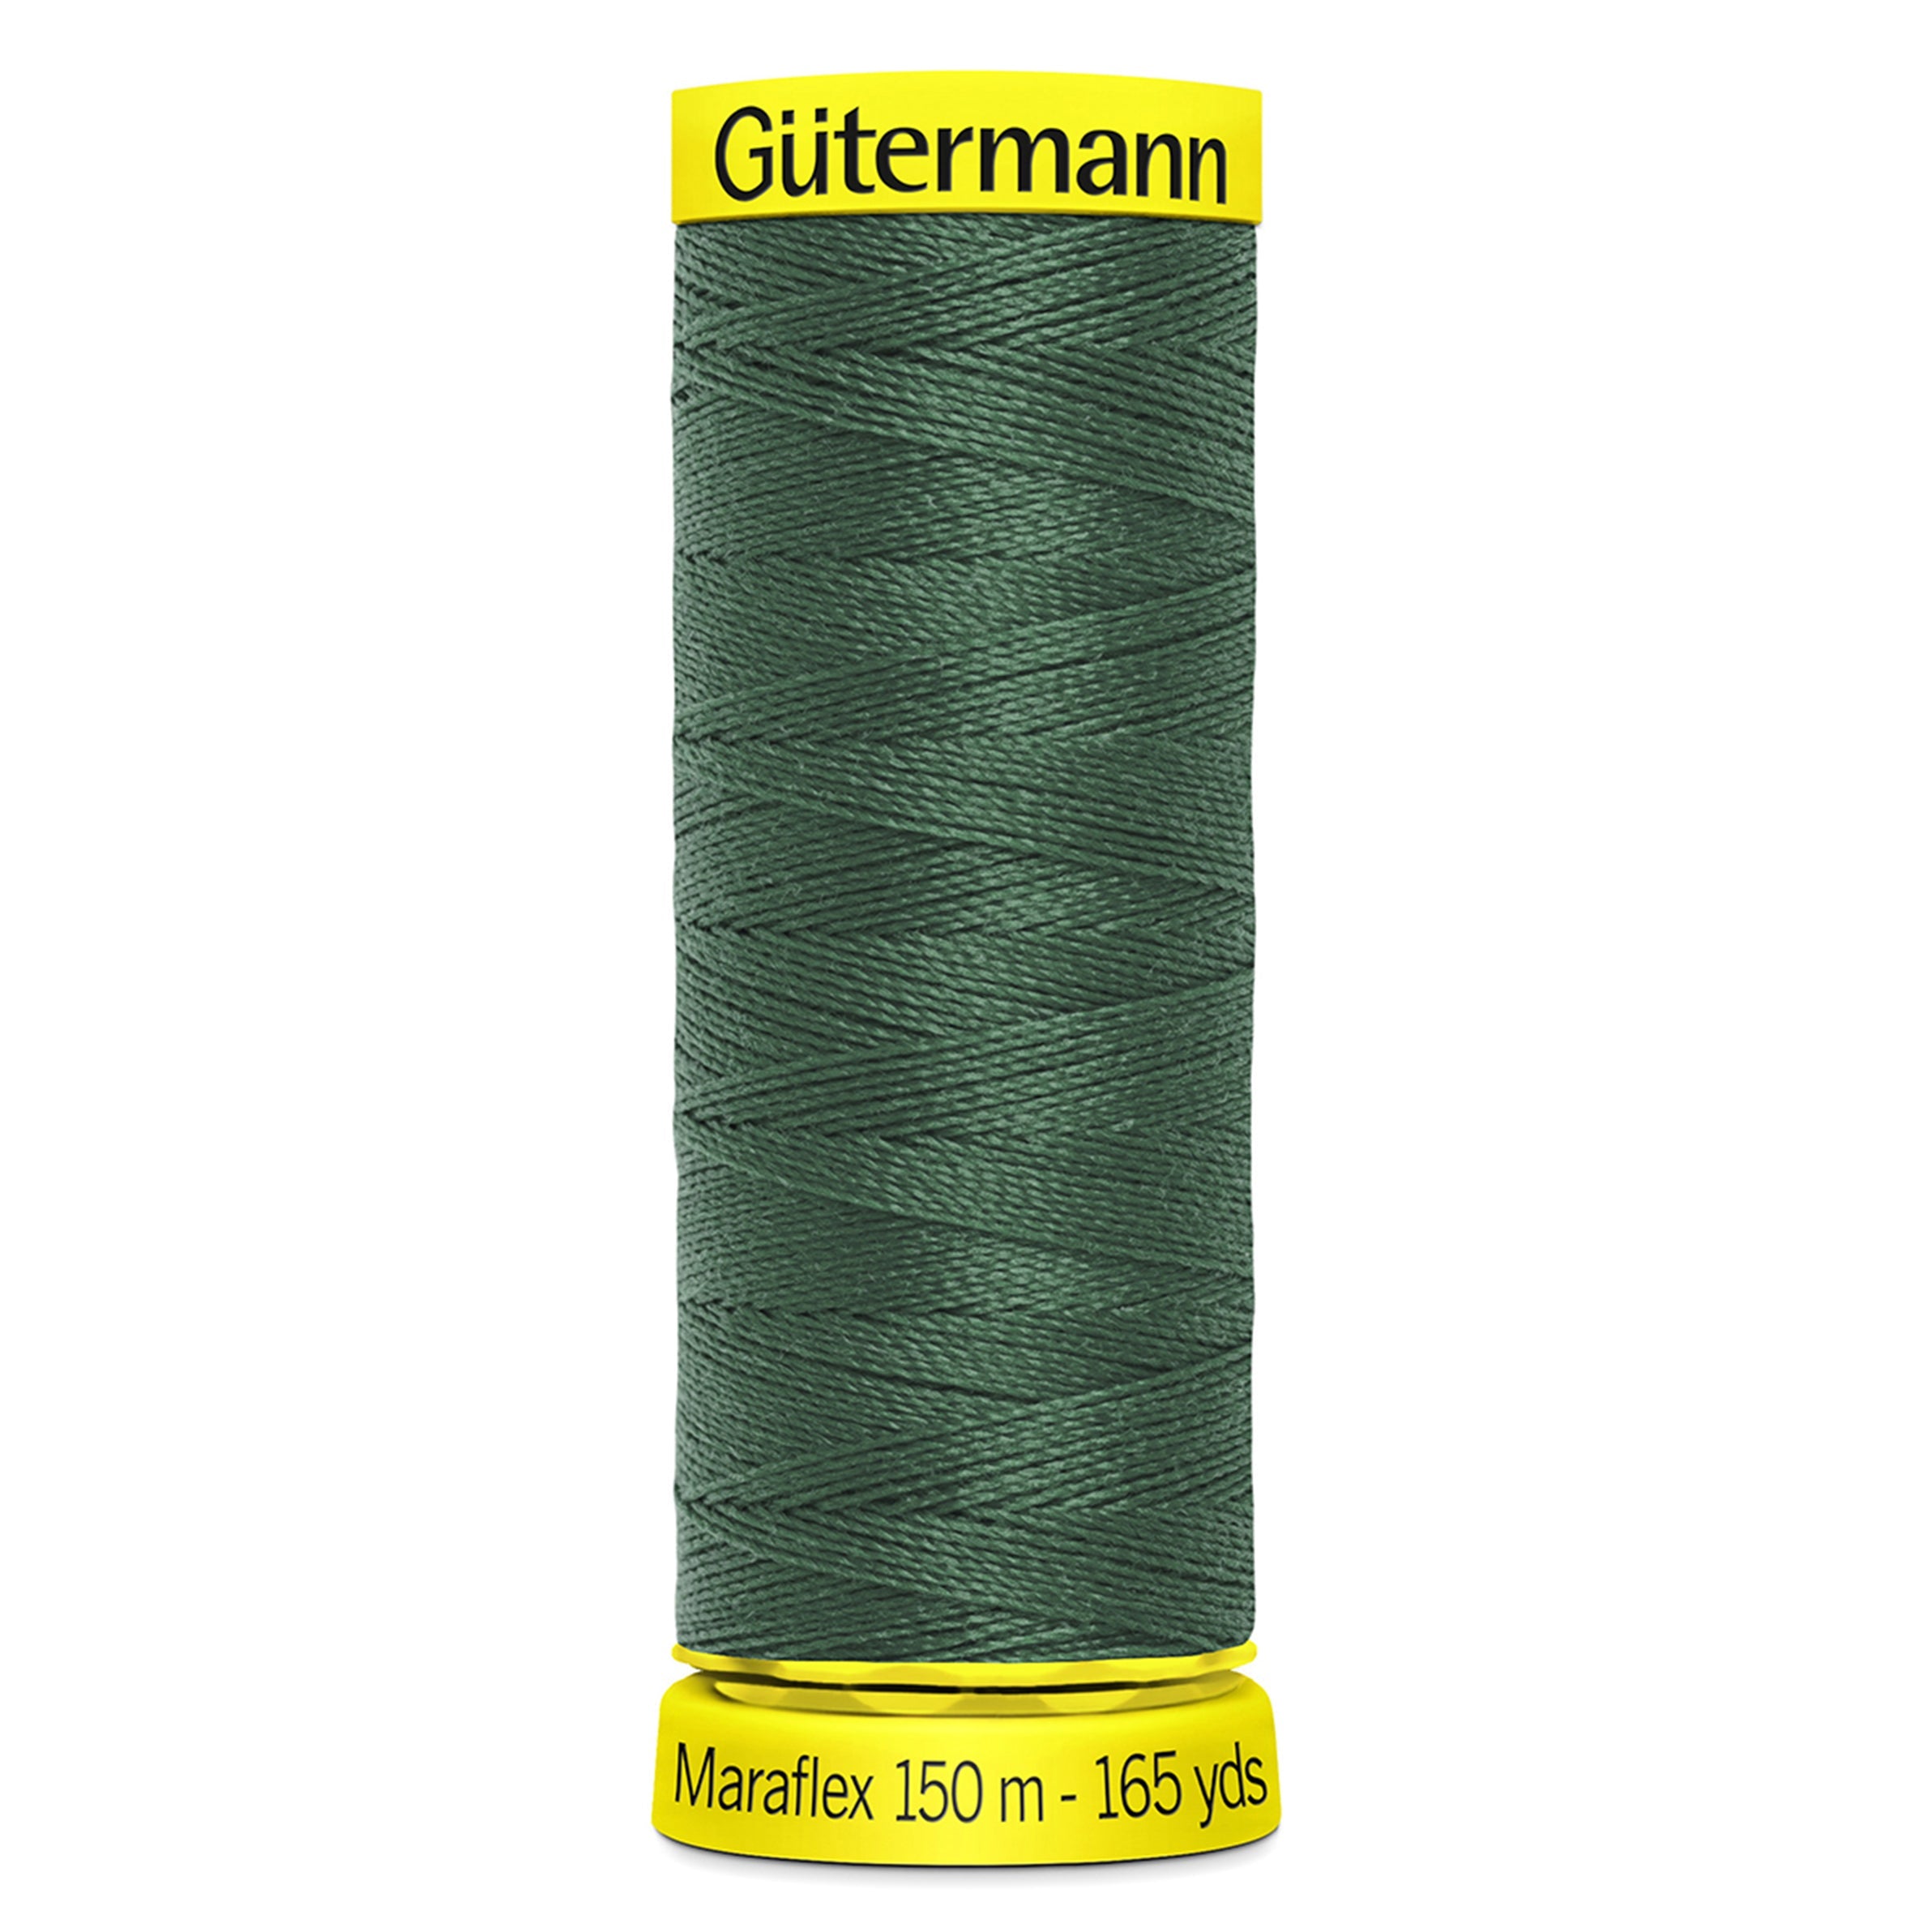 Gutermann Maraflex Stretchy Sewing Thread 150m colour 561 Pine Green from Jaycotts Sewing Supplies